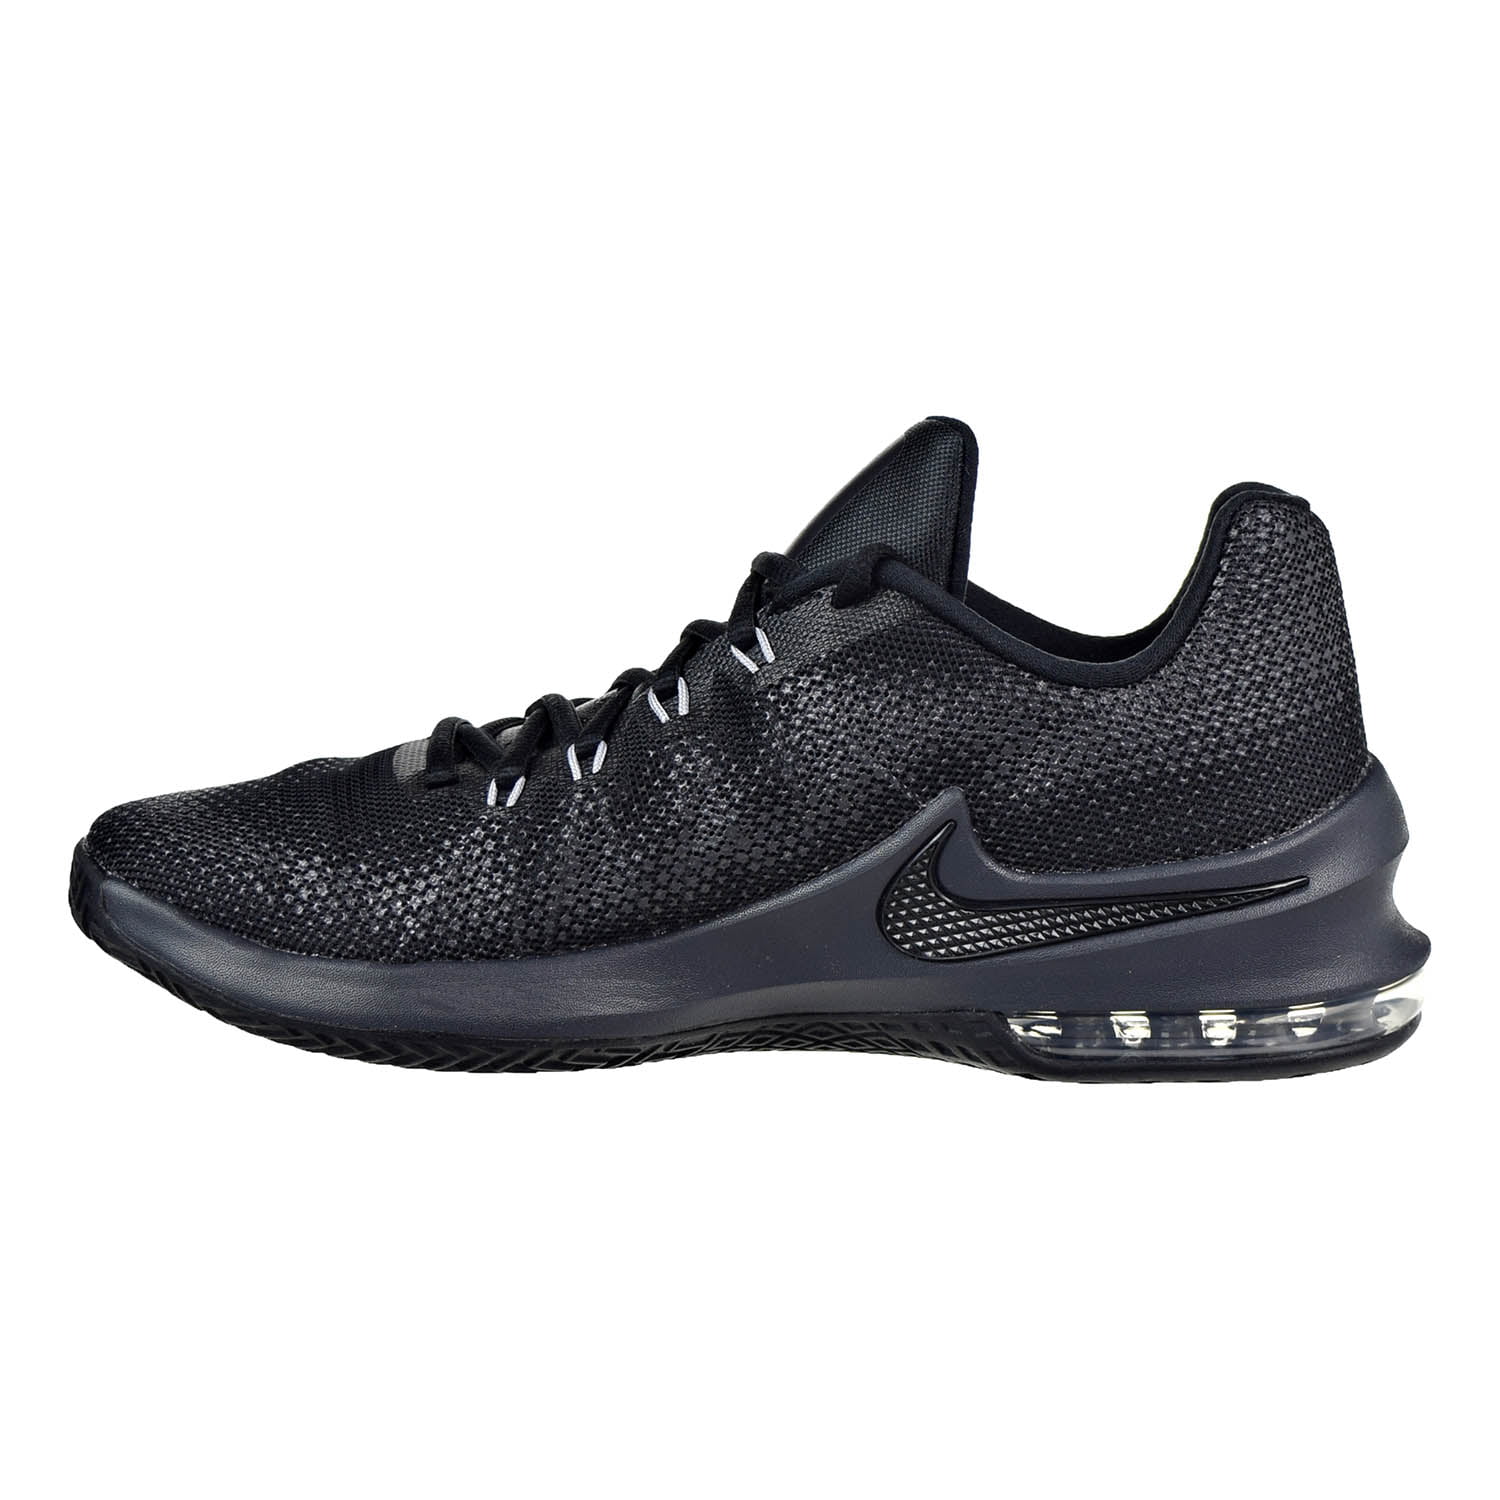 Men's Air Max Infuriate Low Cool Grey / Black-White Ankle-High Basketball Shoe -